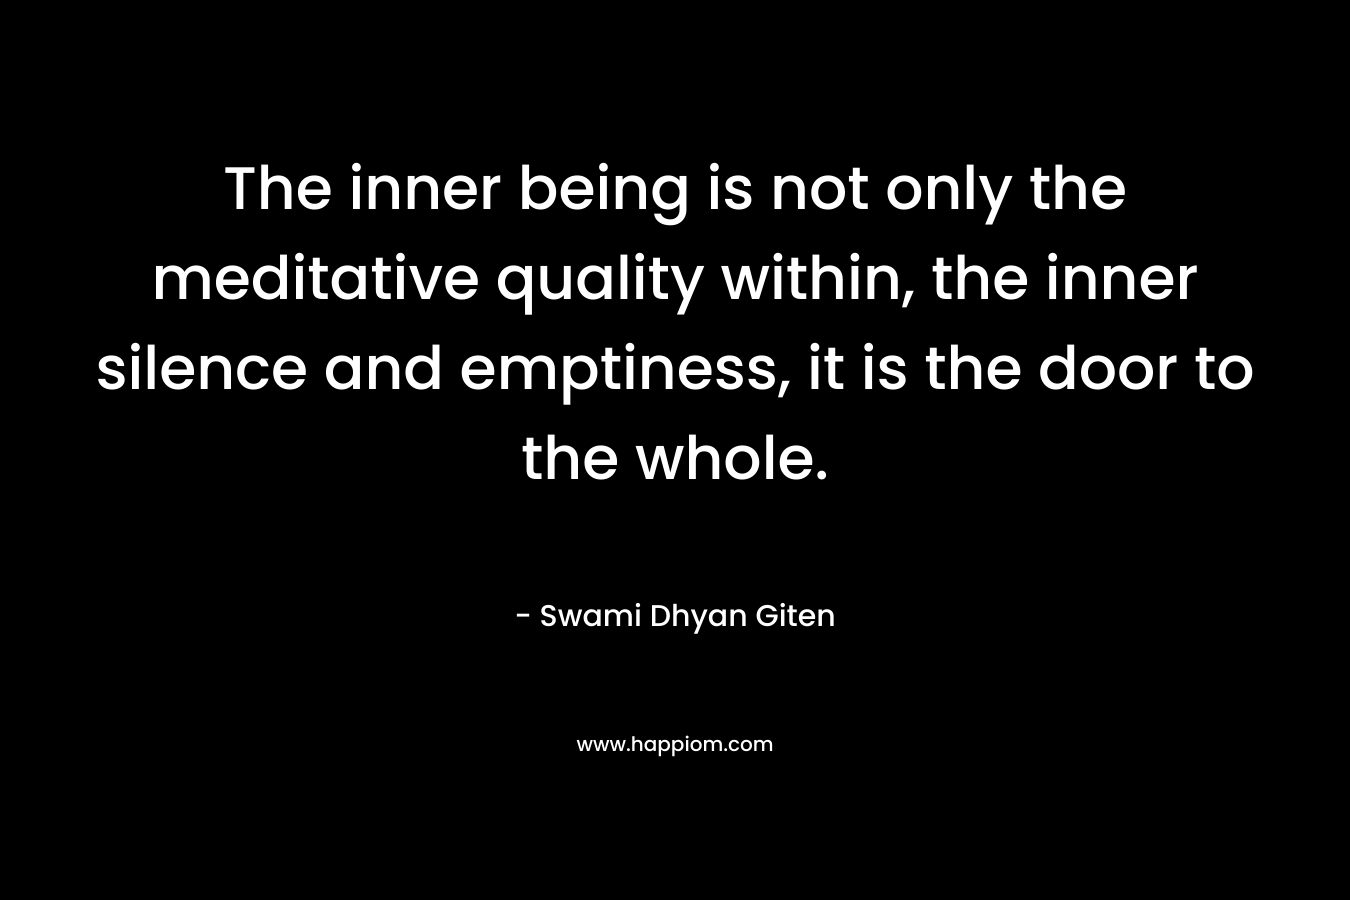 The inner being is not only the meditative quality within, the inner silence and emptiness, it is the door to the whole.